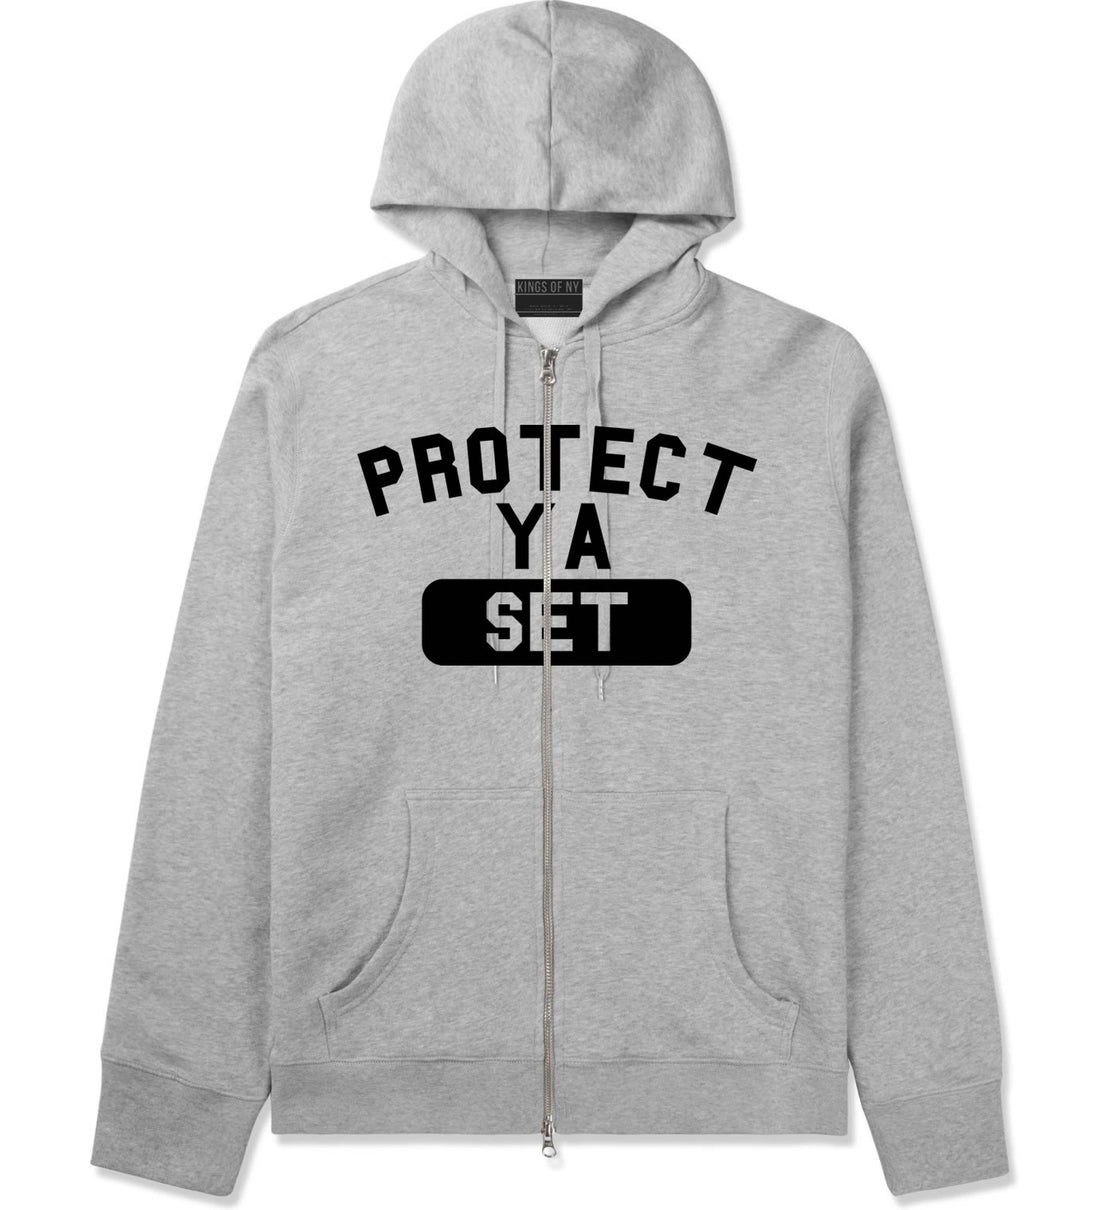 Protect Ya Set Neck Zip Up Hoodie in Grey By Kings Of NY